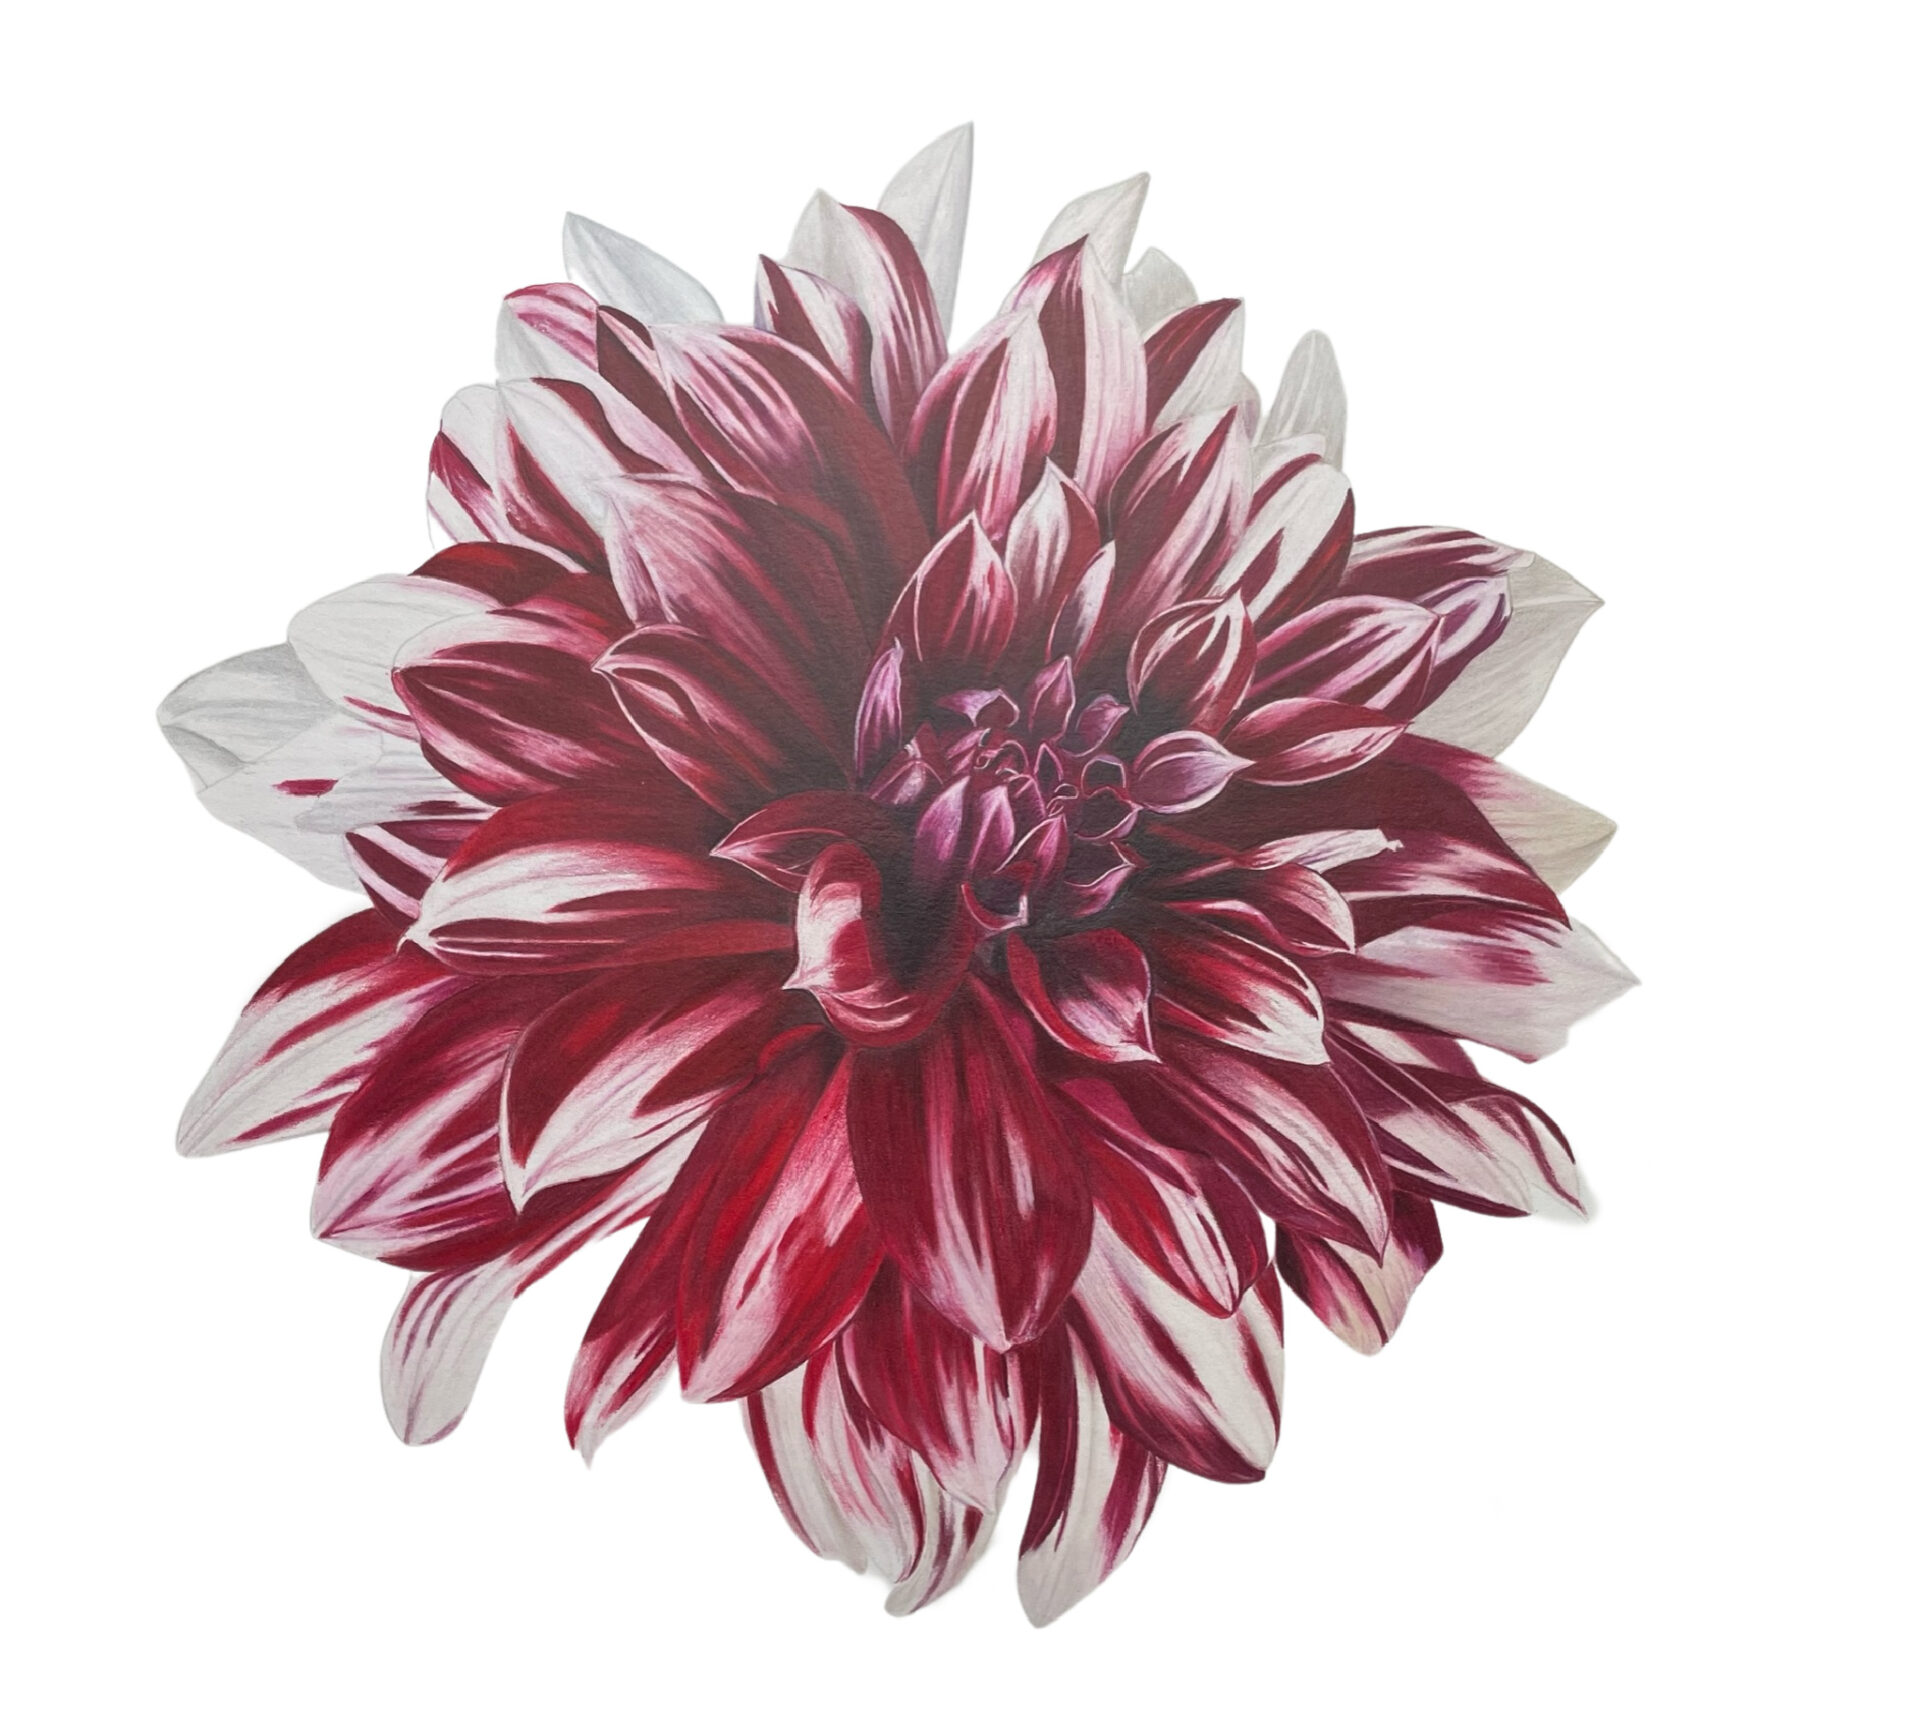 Colored Pencil Drawing of a Big Red Dahlia